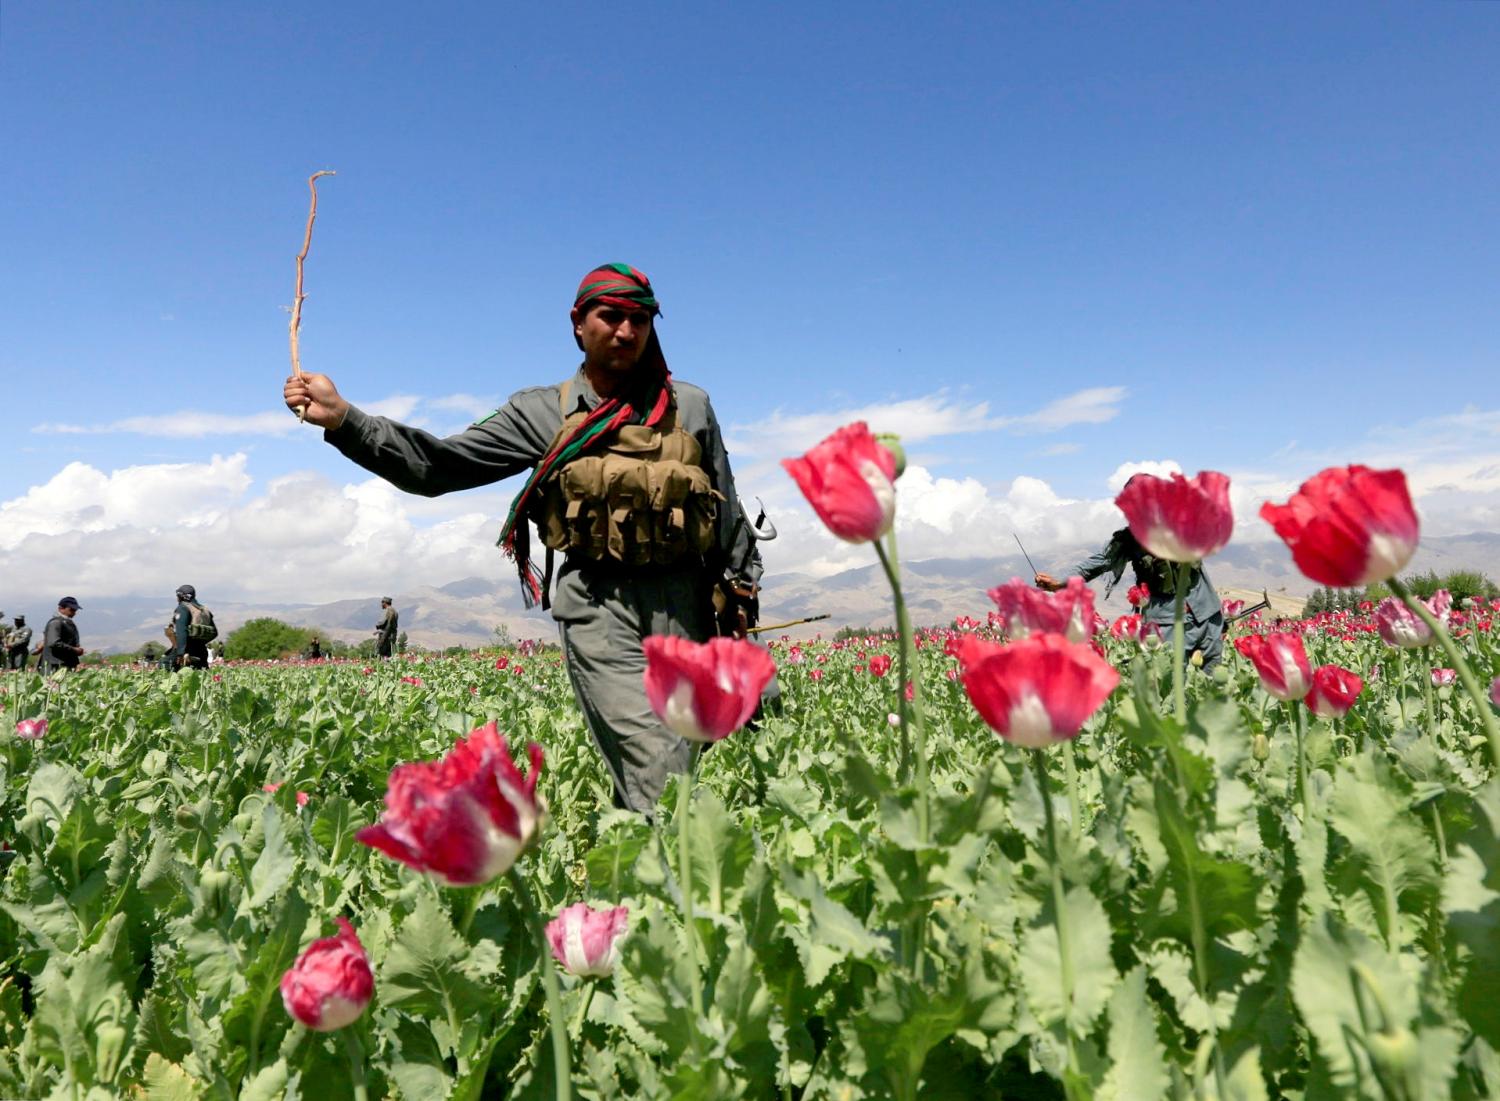 DATE IMPORTED:April 04, 2017An Afghan policeman destroys poppies during a campaign against narcotics in Jalalabad province, Afghanistan, April 4, 2017. REUTERS/Parwiz TPX IMAGES OF THE DAY